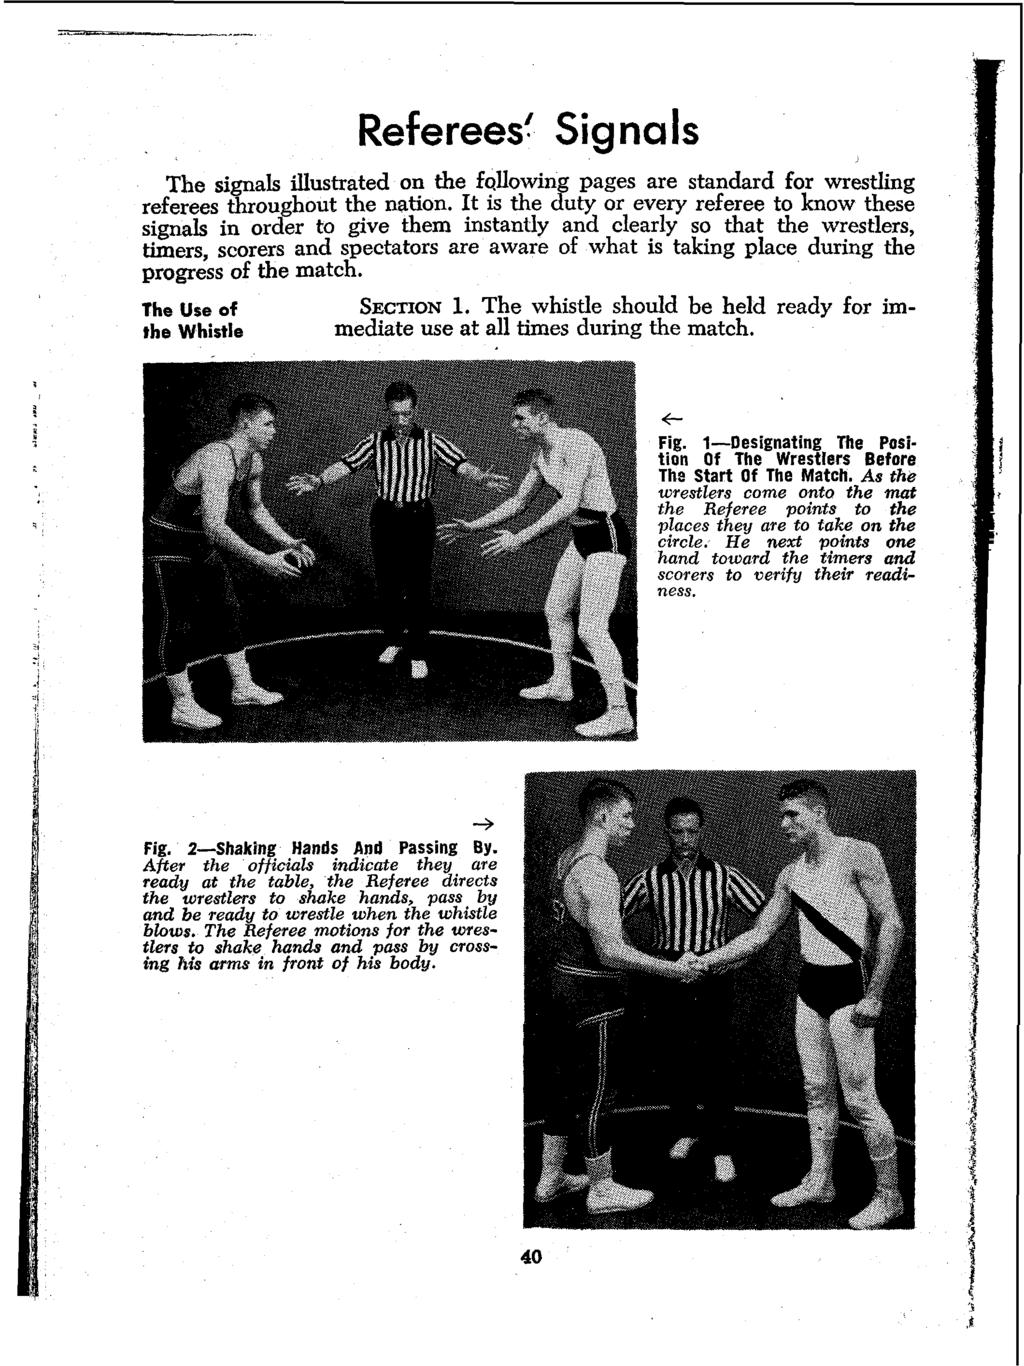 Referees! Signals The signals illustrated on the foillowin pages are standard for wrestling referees throughout the nation.